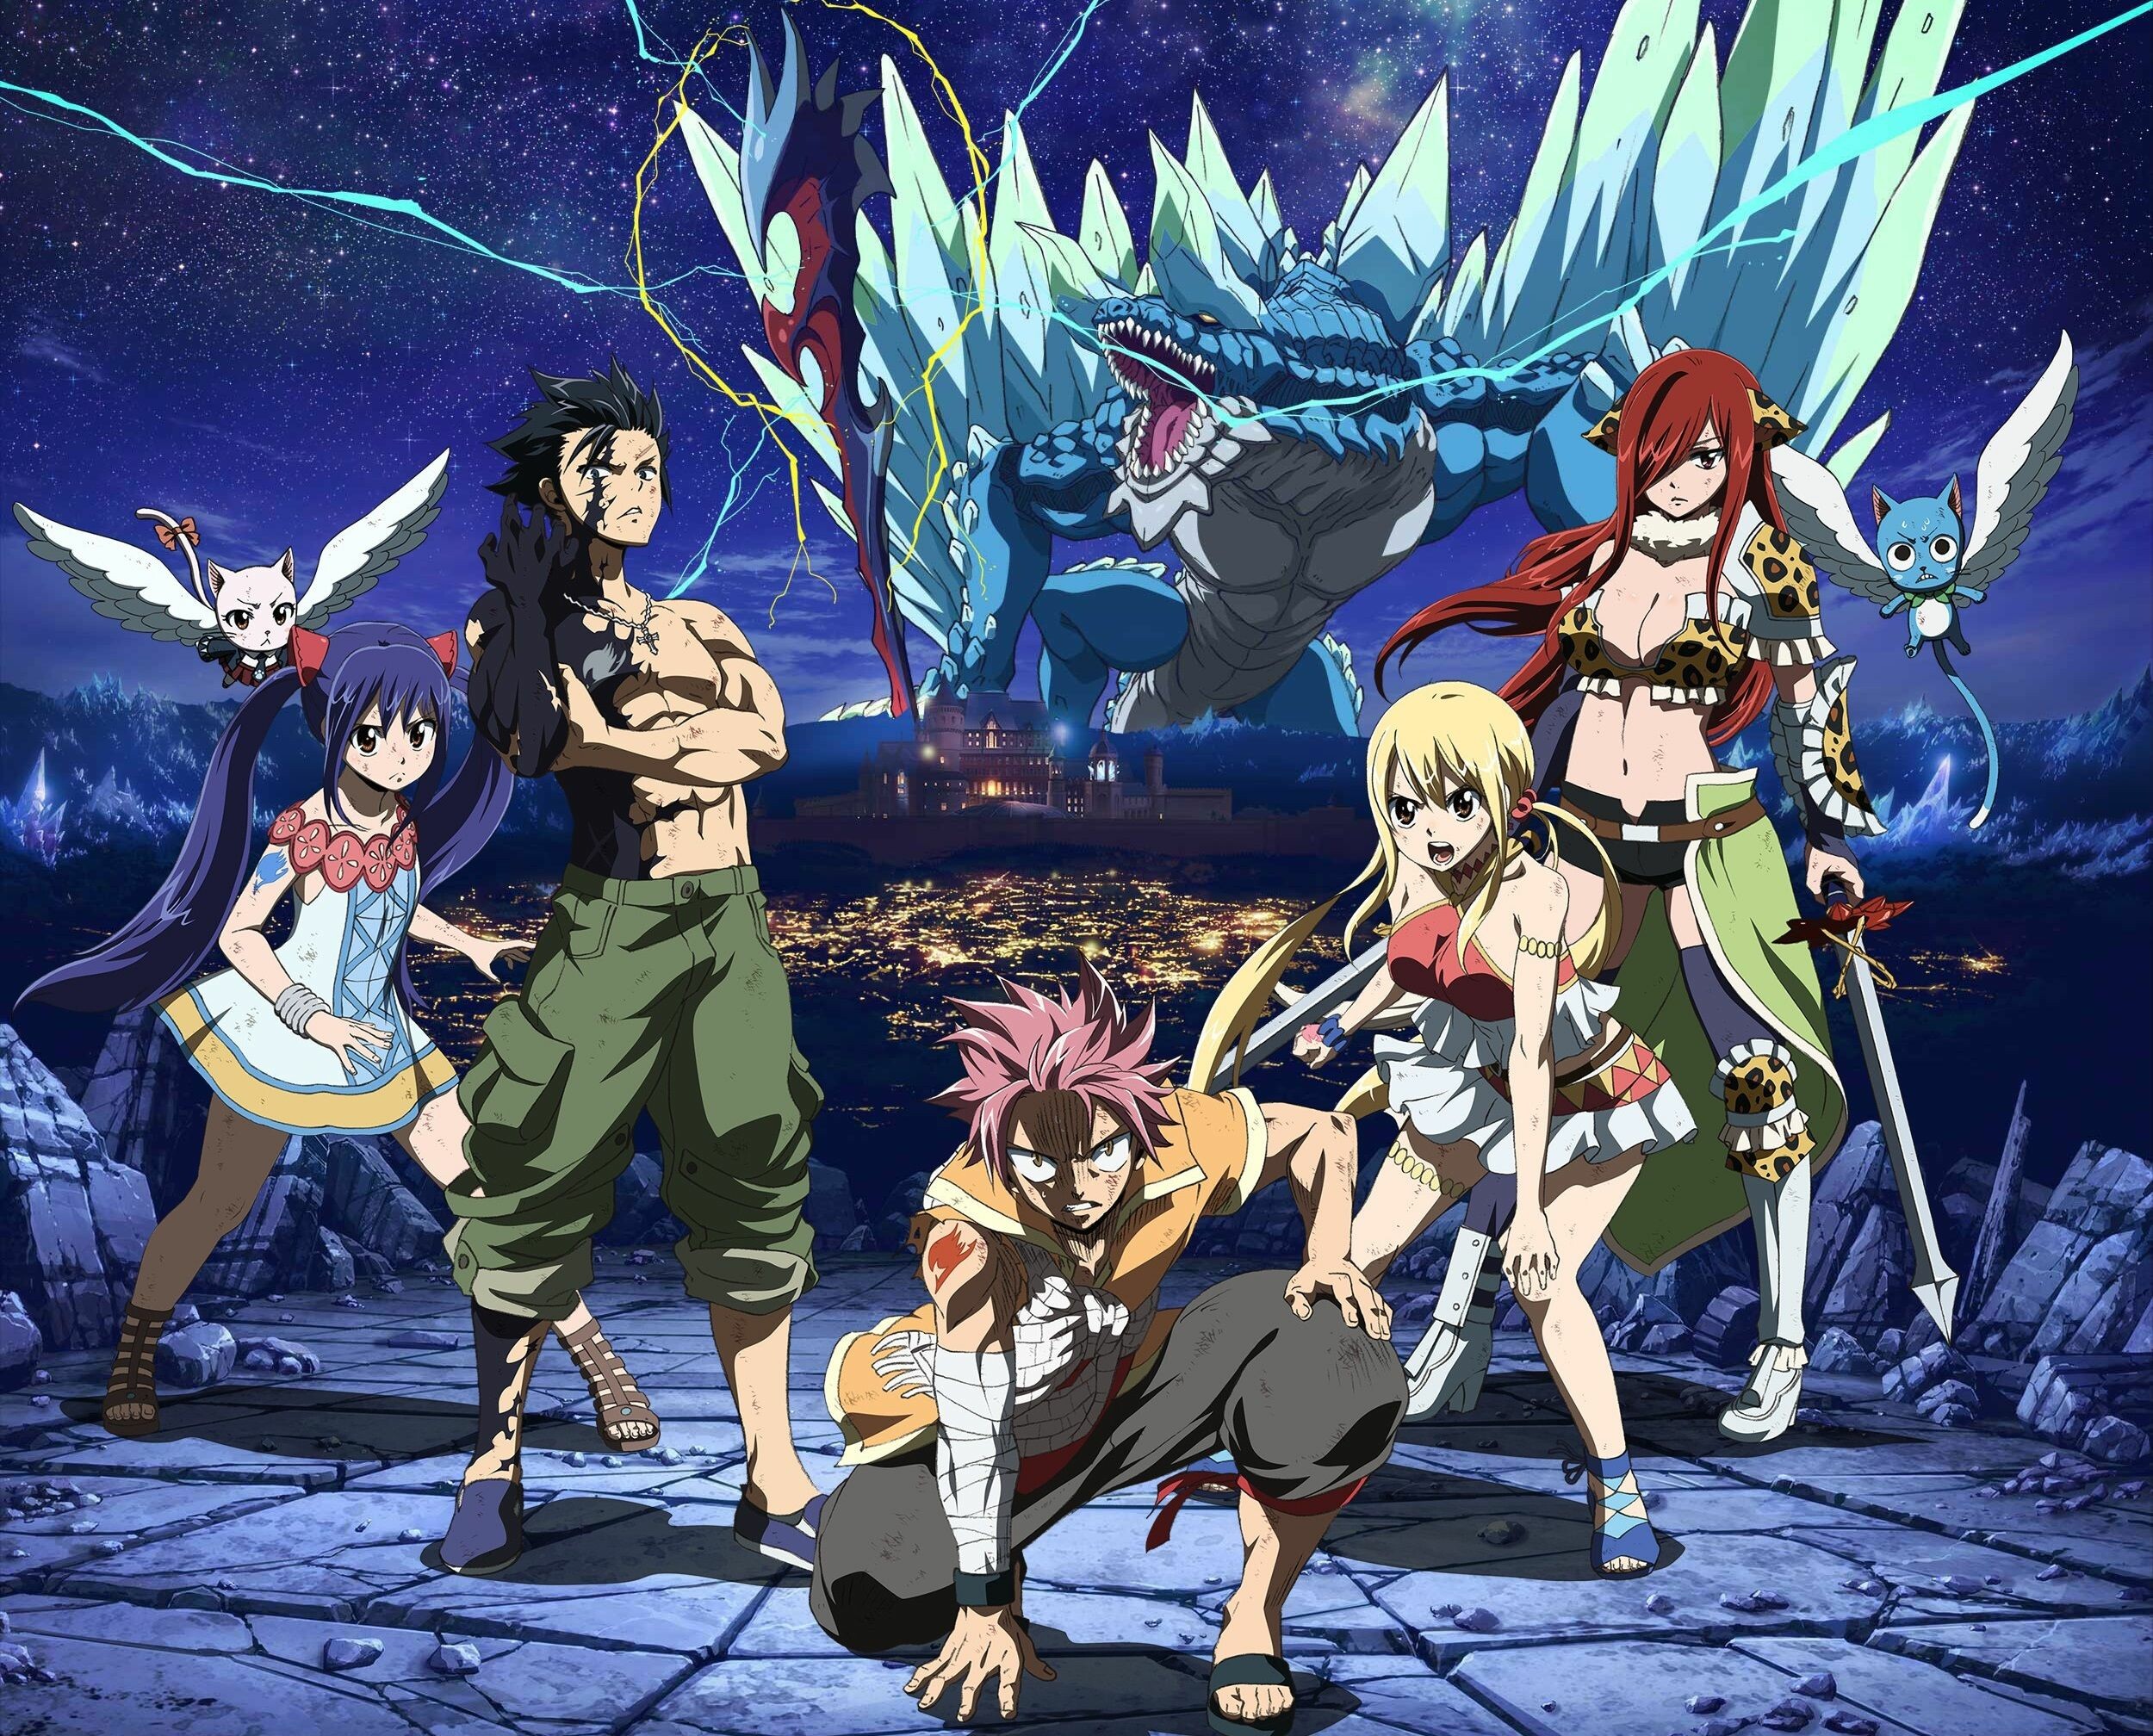 Fairy Tail: Erza Scarlet, Wendy Marvell, Lucy Heartfilia, Natsu Dragneel, Gray Fullbuster. 2500x2020 HD Background.